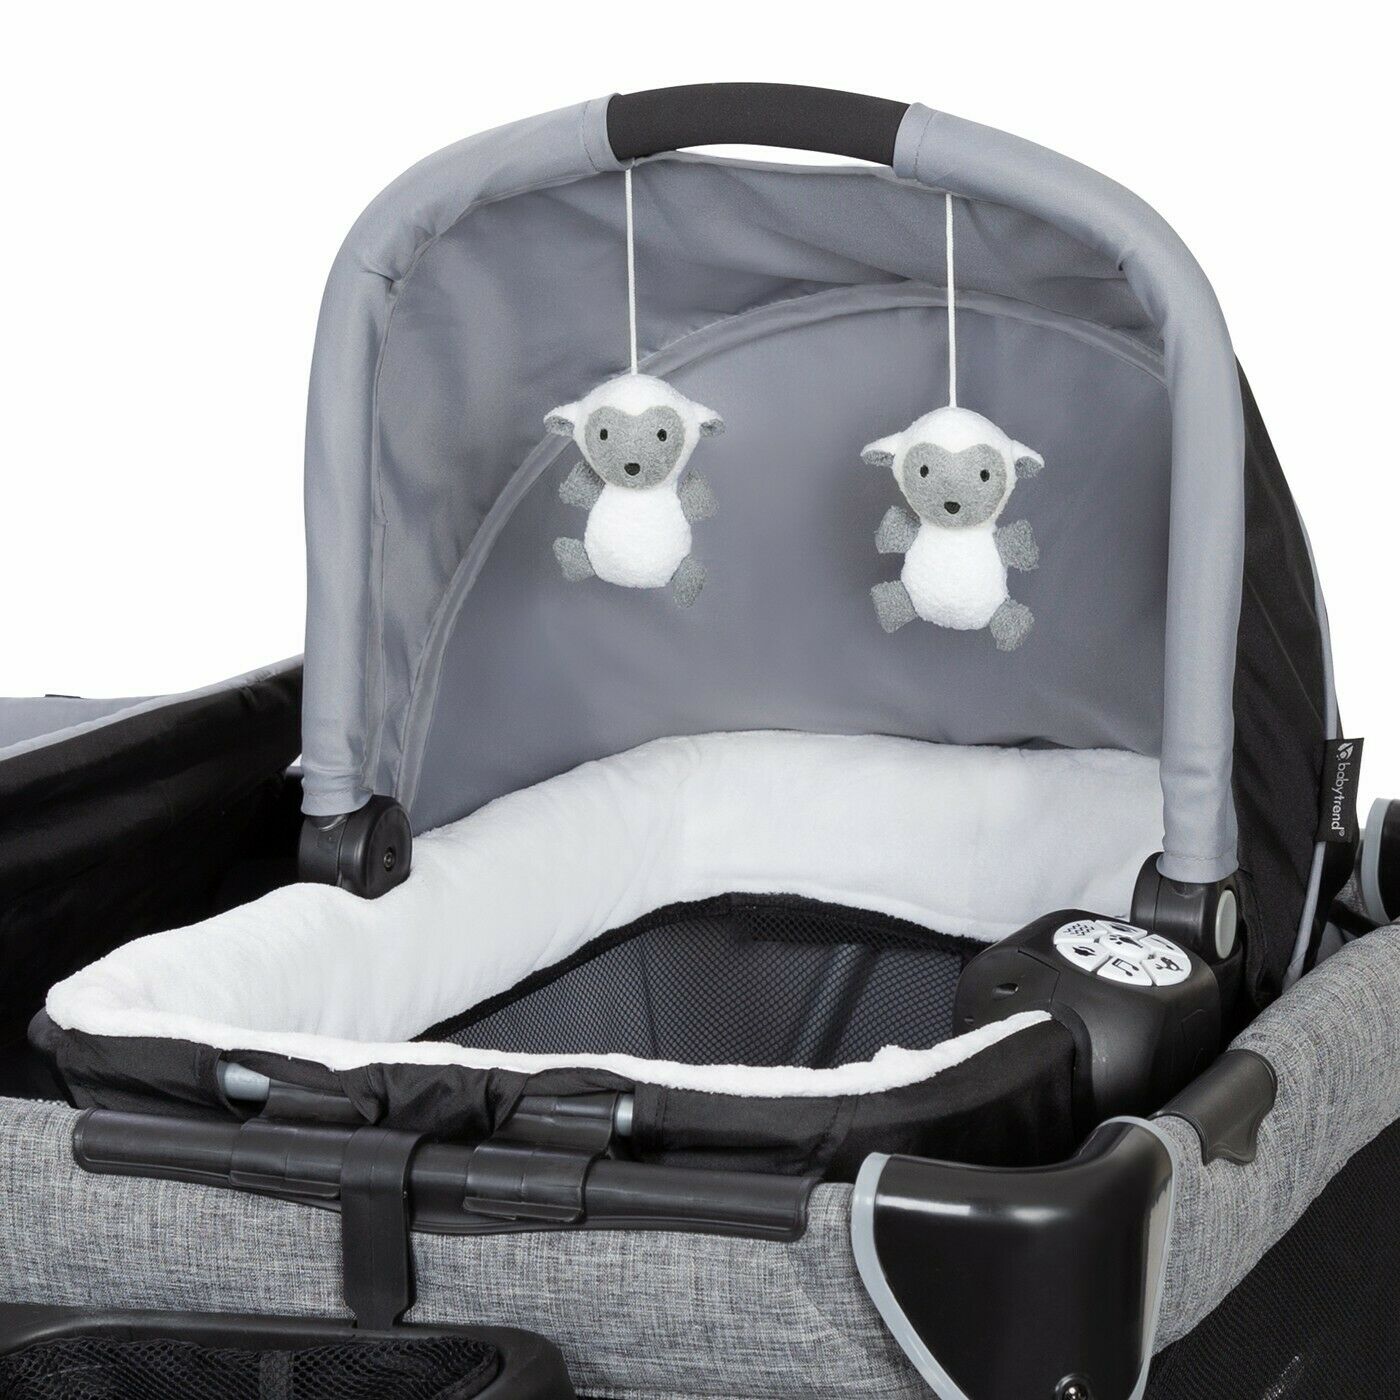 Infant Car Seat Stroller Baby Newborn 5 in 1 Combo Playard High Chair Travel